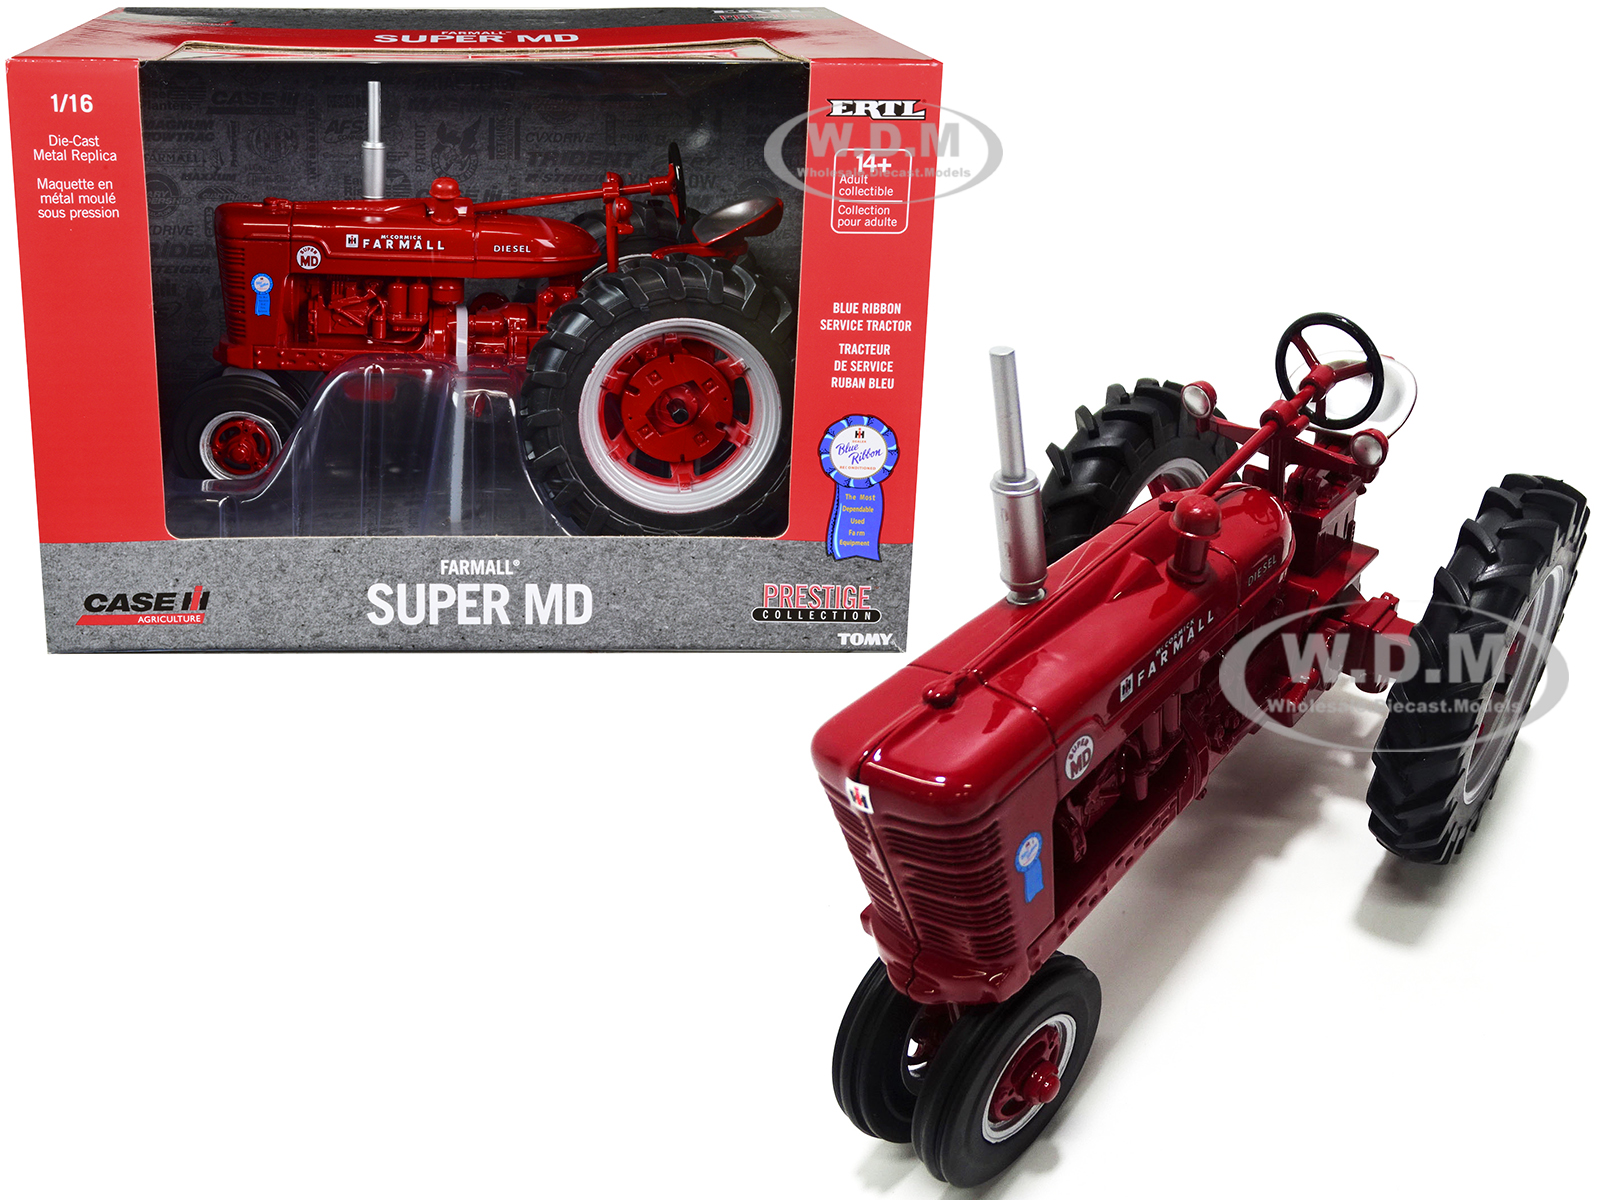 Farmall Super MD Narrow Front Tractor Red "Blue Ribbon Reconditioned" "Case IH Agriculture" Series 1/16 Diecast Model by ERTL TOMY